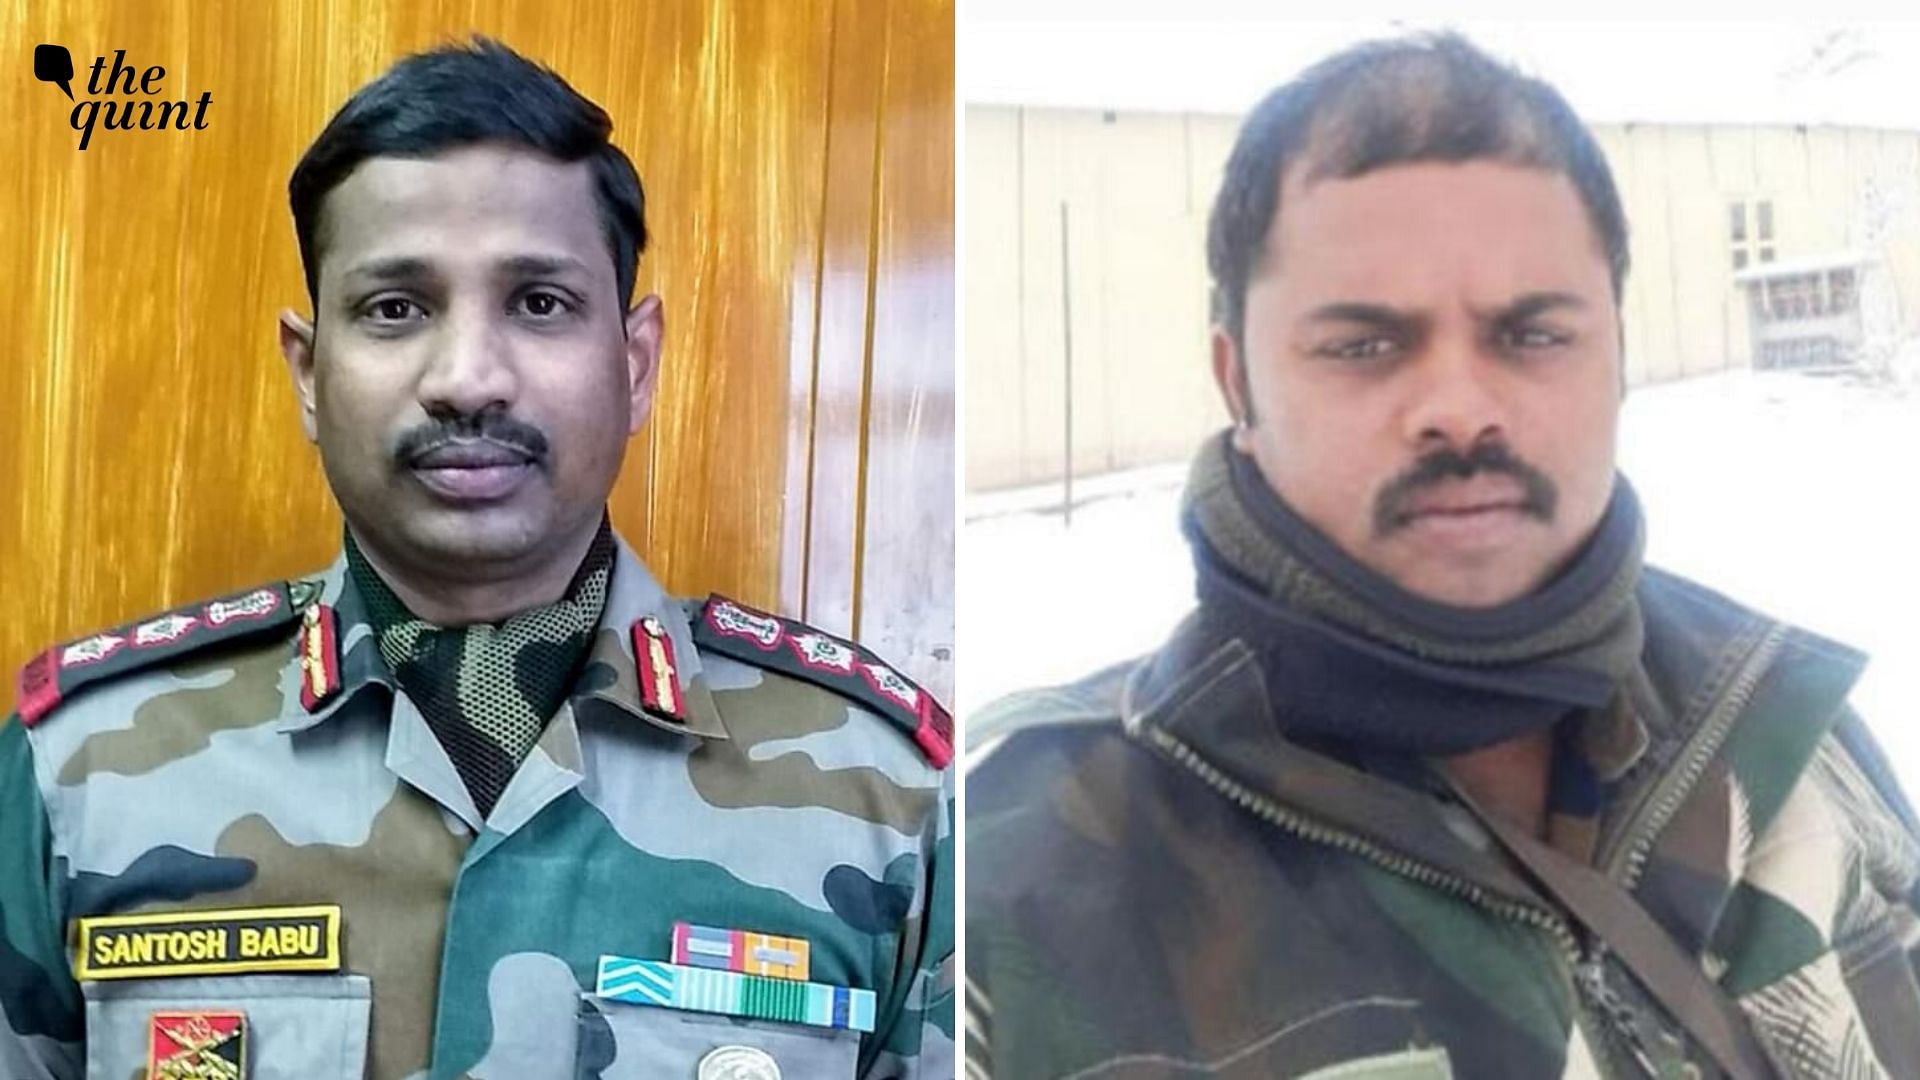 Colonel Santosh Babu and Havildar Palani were among the three Indian Army personnel killed in a clash with Chinese PLA on Monday, 15 June.